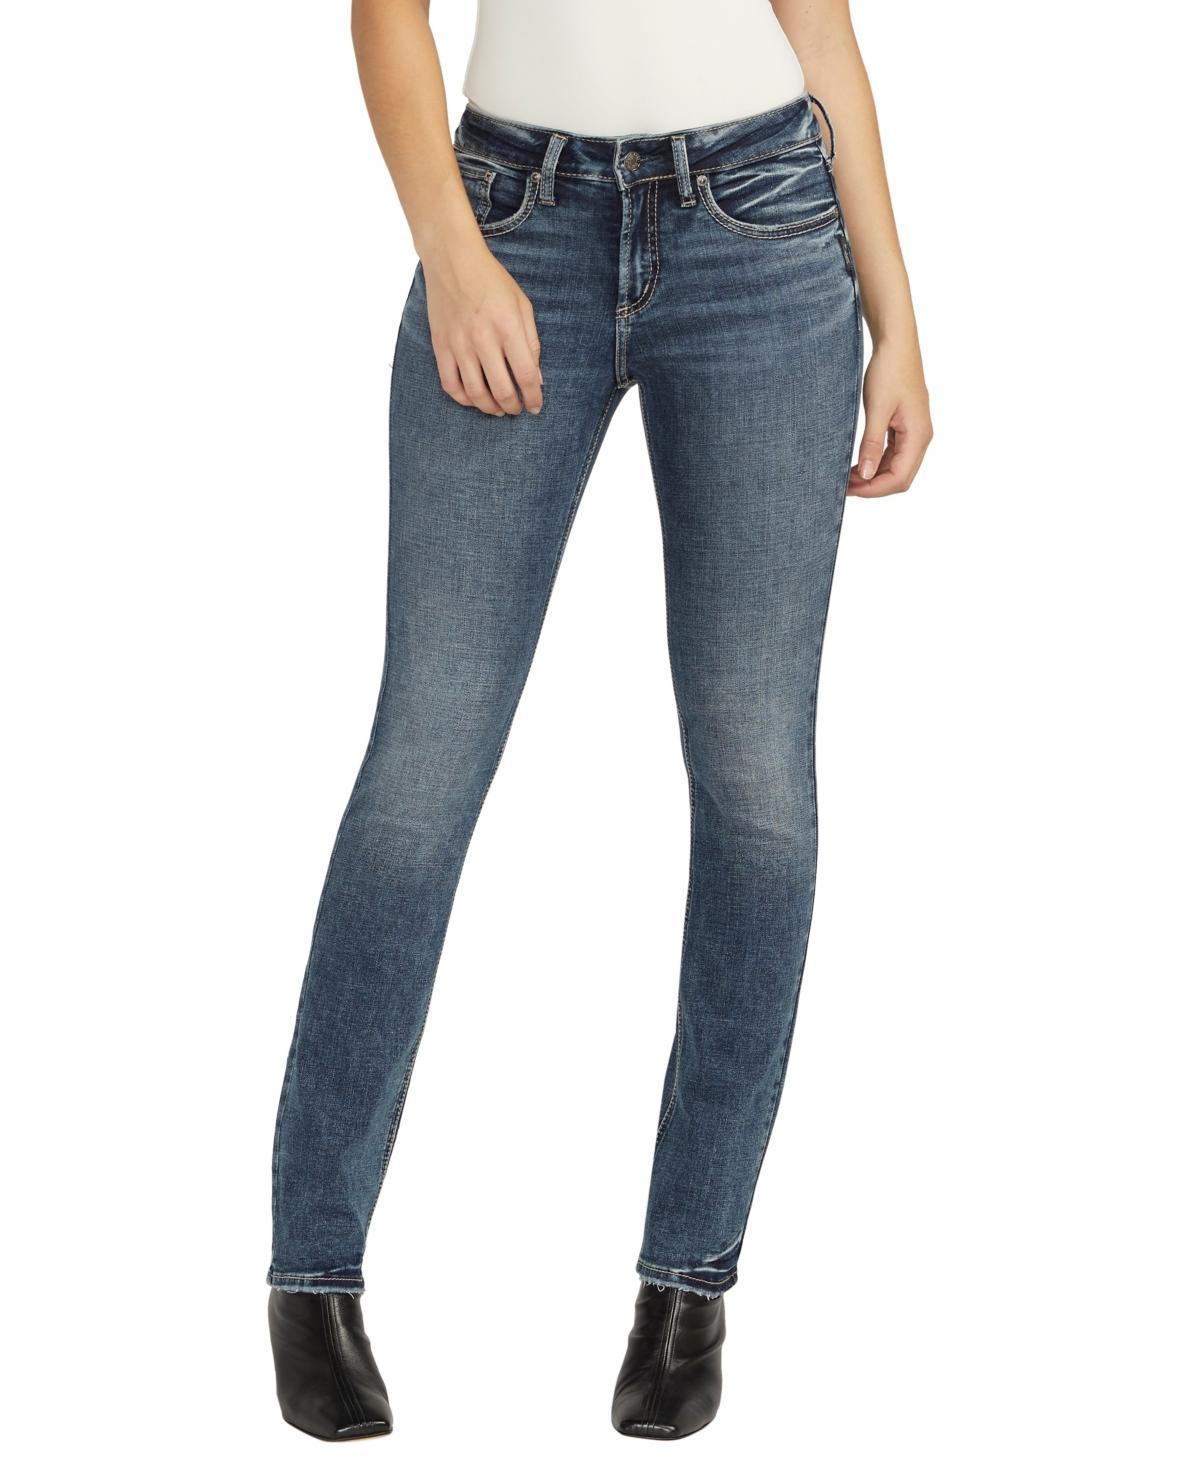 Silver Jeans Co. Suki Low Rise Straight Leg Jeans Product Image